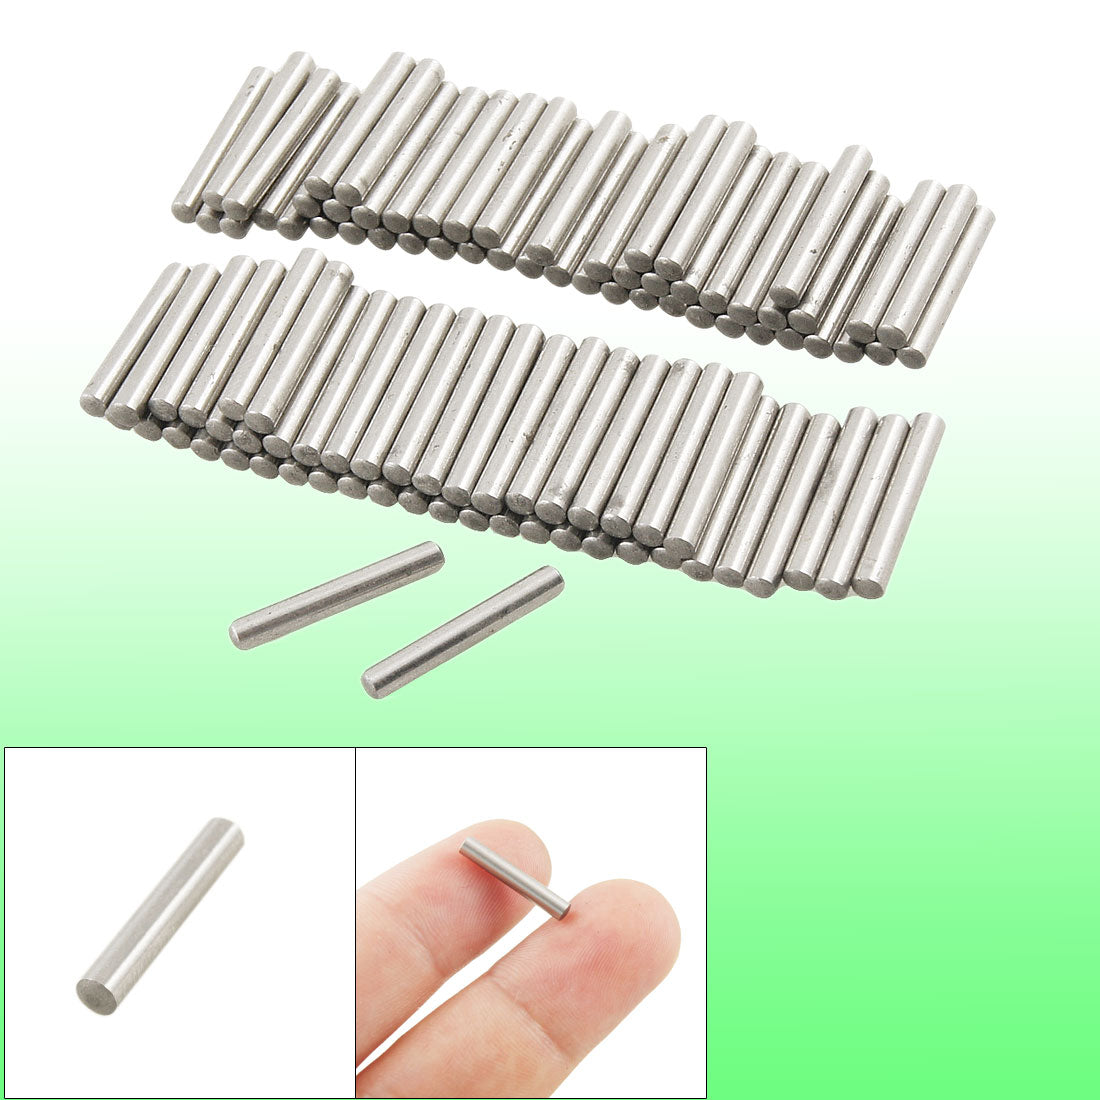 uxcell Uxcell 100 Pcs Stainless Steel 2.6mm x 15.8mm Dowel Pins Fasten Elements